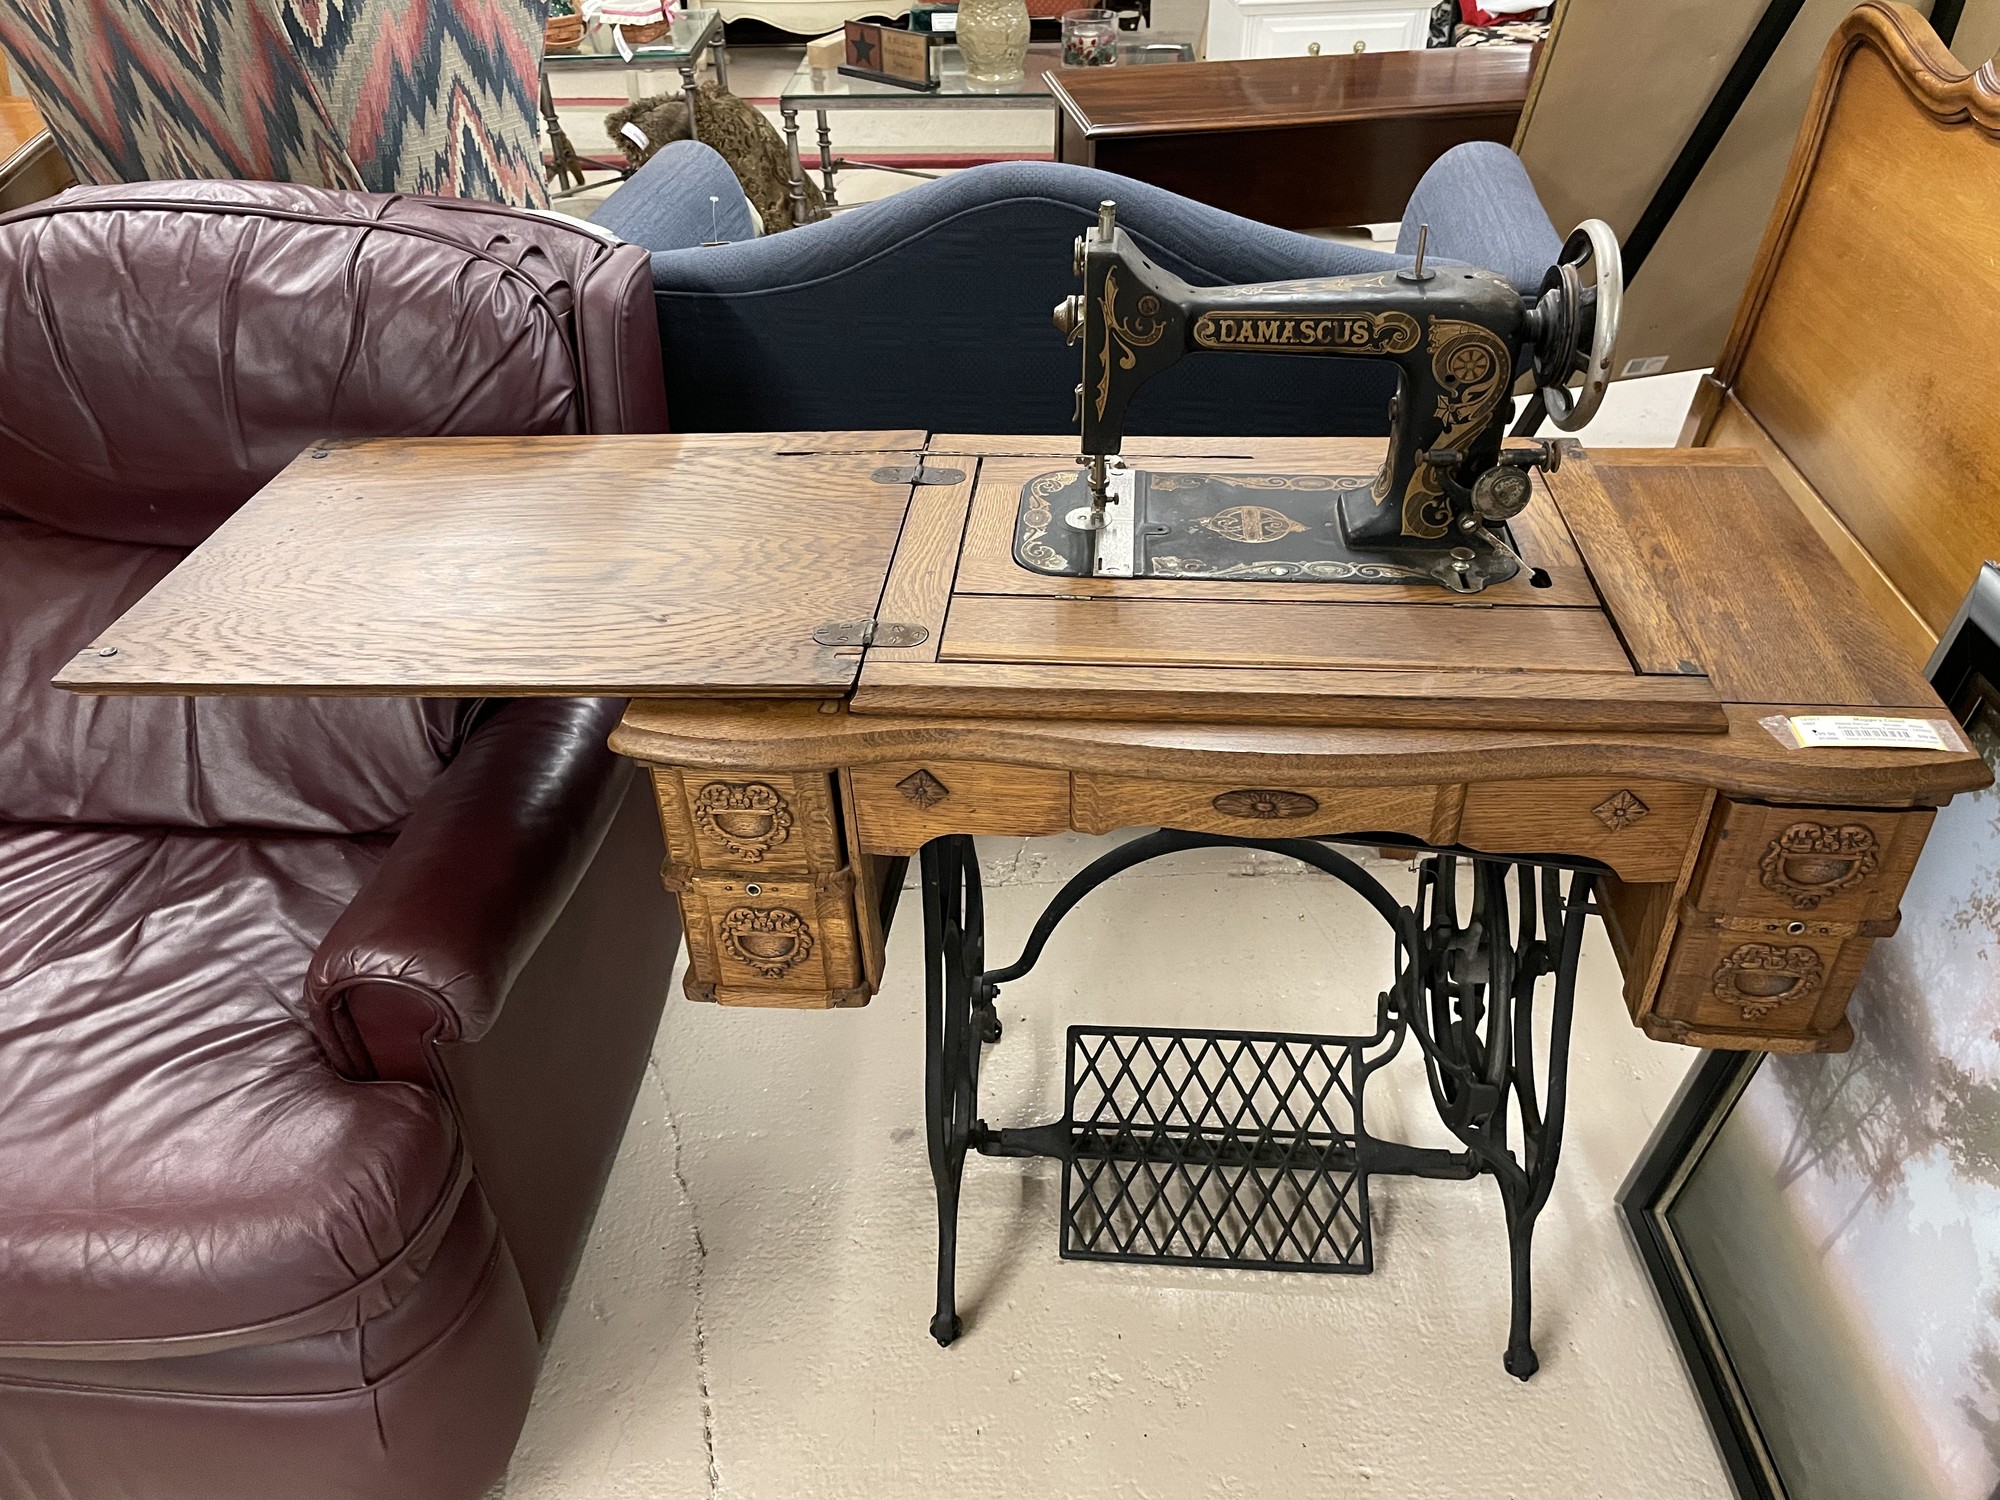 Antique Damascus sewing machine and table
We are unsure of the age but the manual is in the drawer, see the photo!
The table is in excellent condition!
Size: 30H/36W/19D
IN STORE PICK UP ONLY